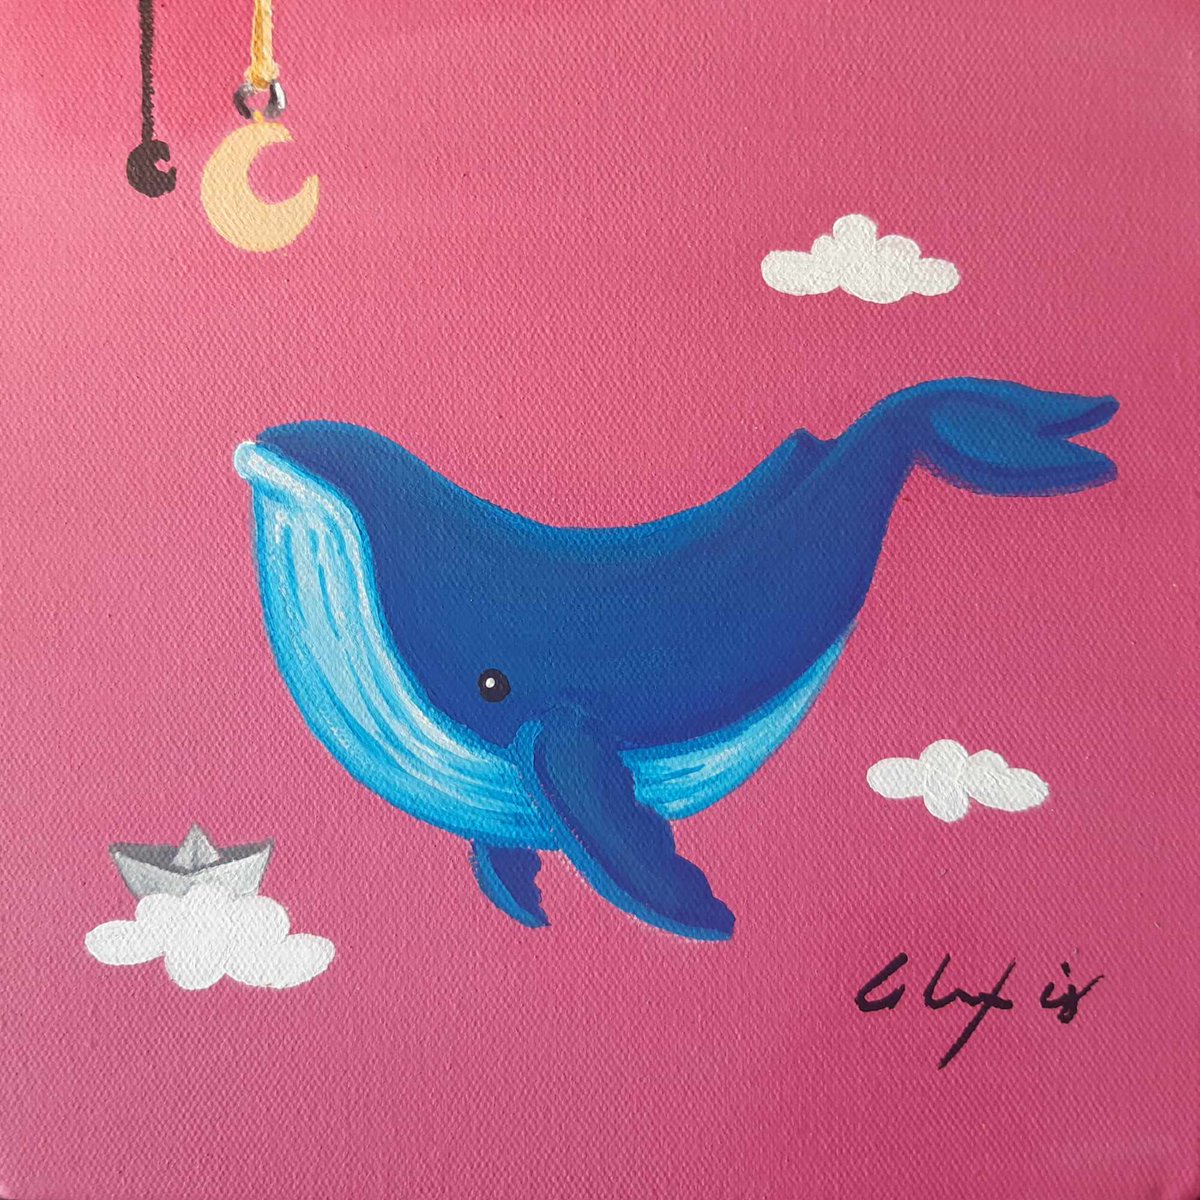 Be free... 

'Flying whales' 
(Art Collection)
Acrylic on canvas 
AVAILABLE 

#AlexisBerny
#artistavisual #visualartist
#art #arte #artwork #painting #pintura #acrylicart #acrylicpainting #acrlicpaintings #acrylicartwork  #whale #whales #whalespainting #whalesart #ballena #cabo